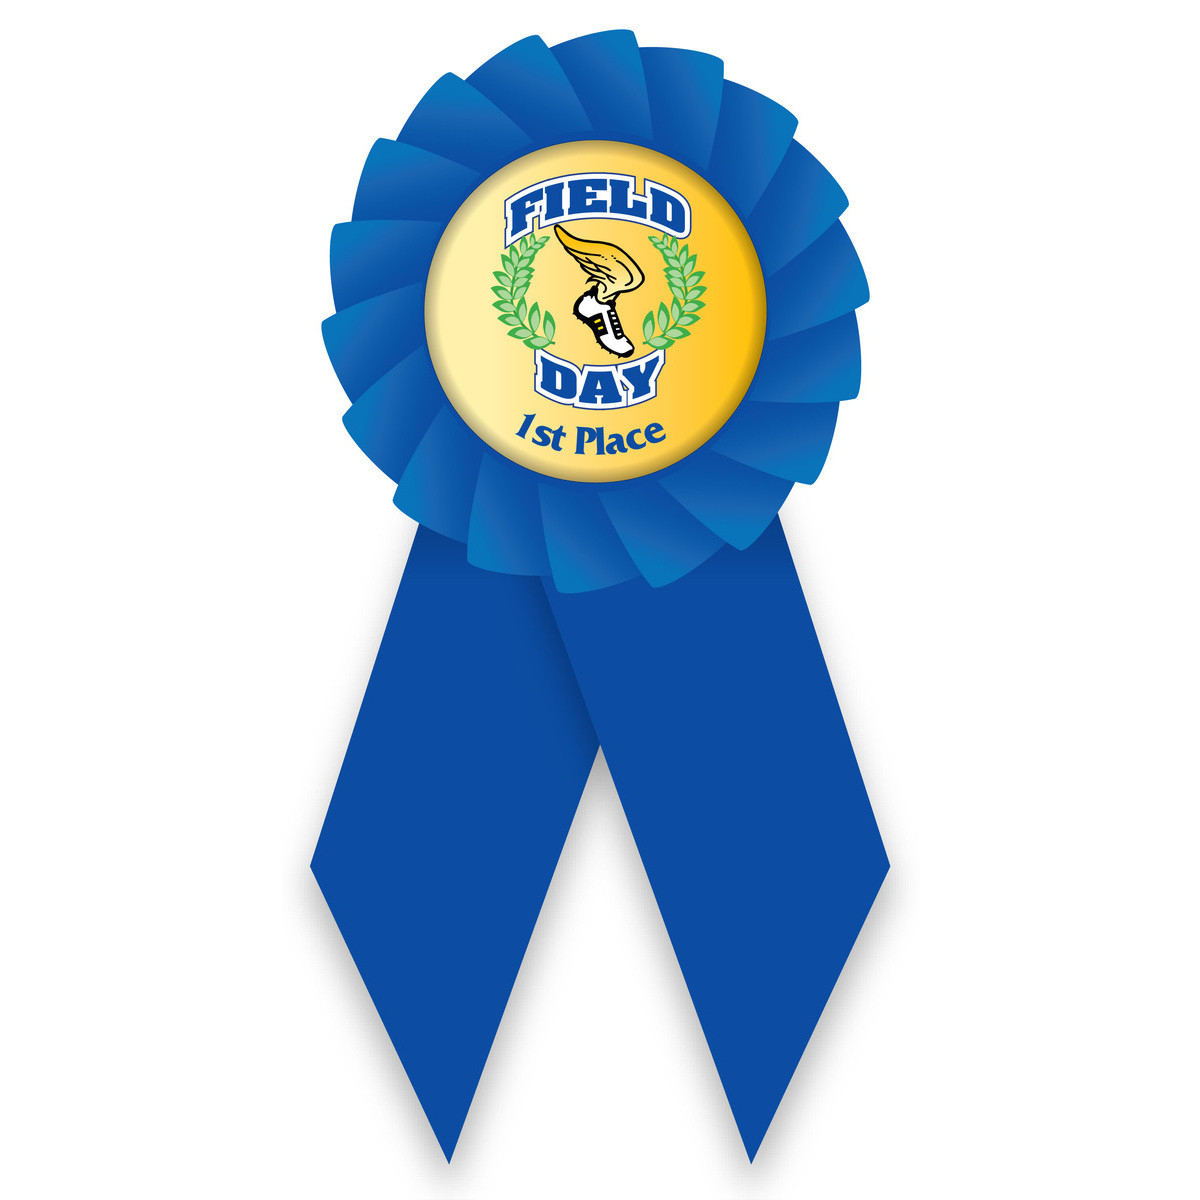 Econo Rosette Ribbon with Button Insert - Field Day, 1st Place